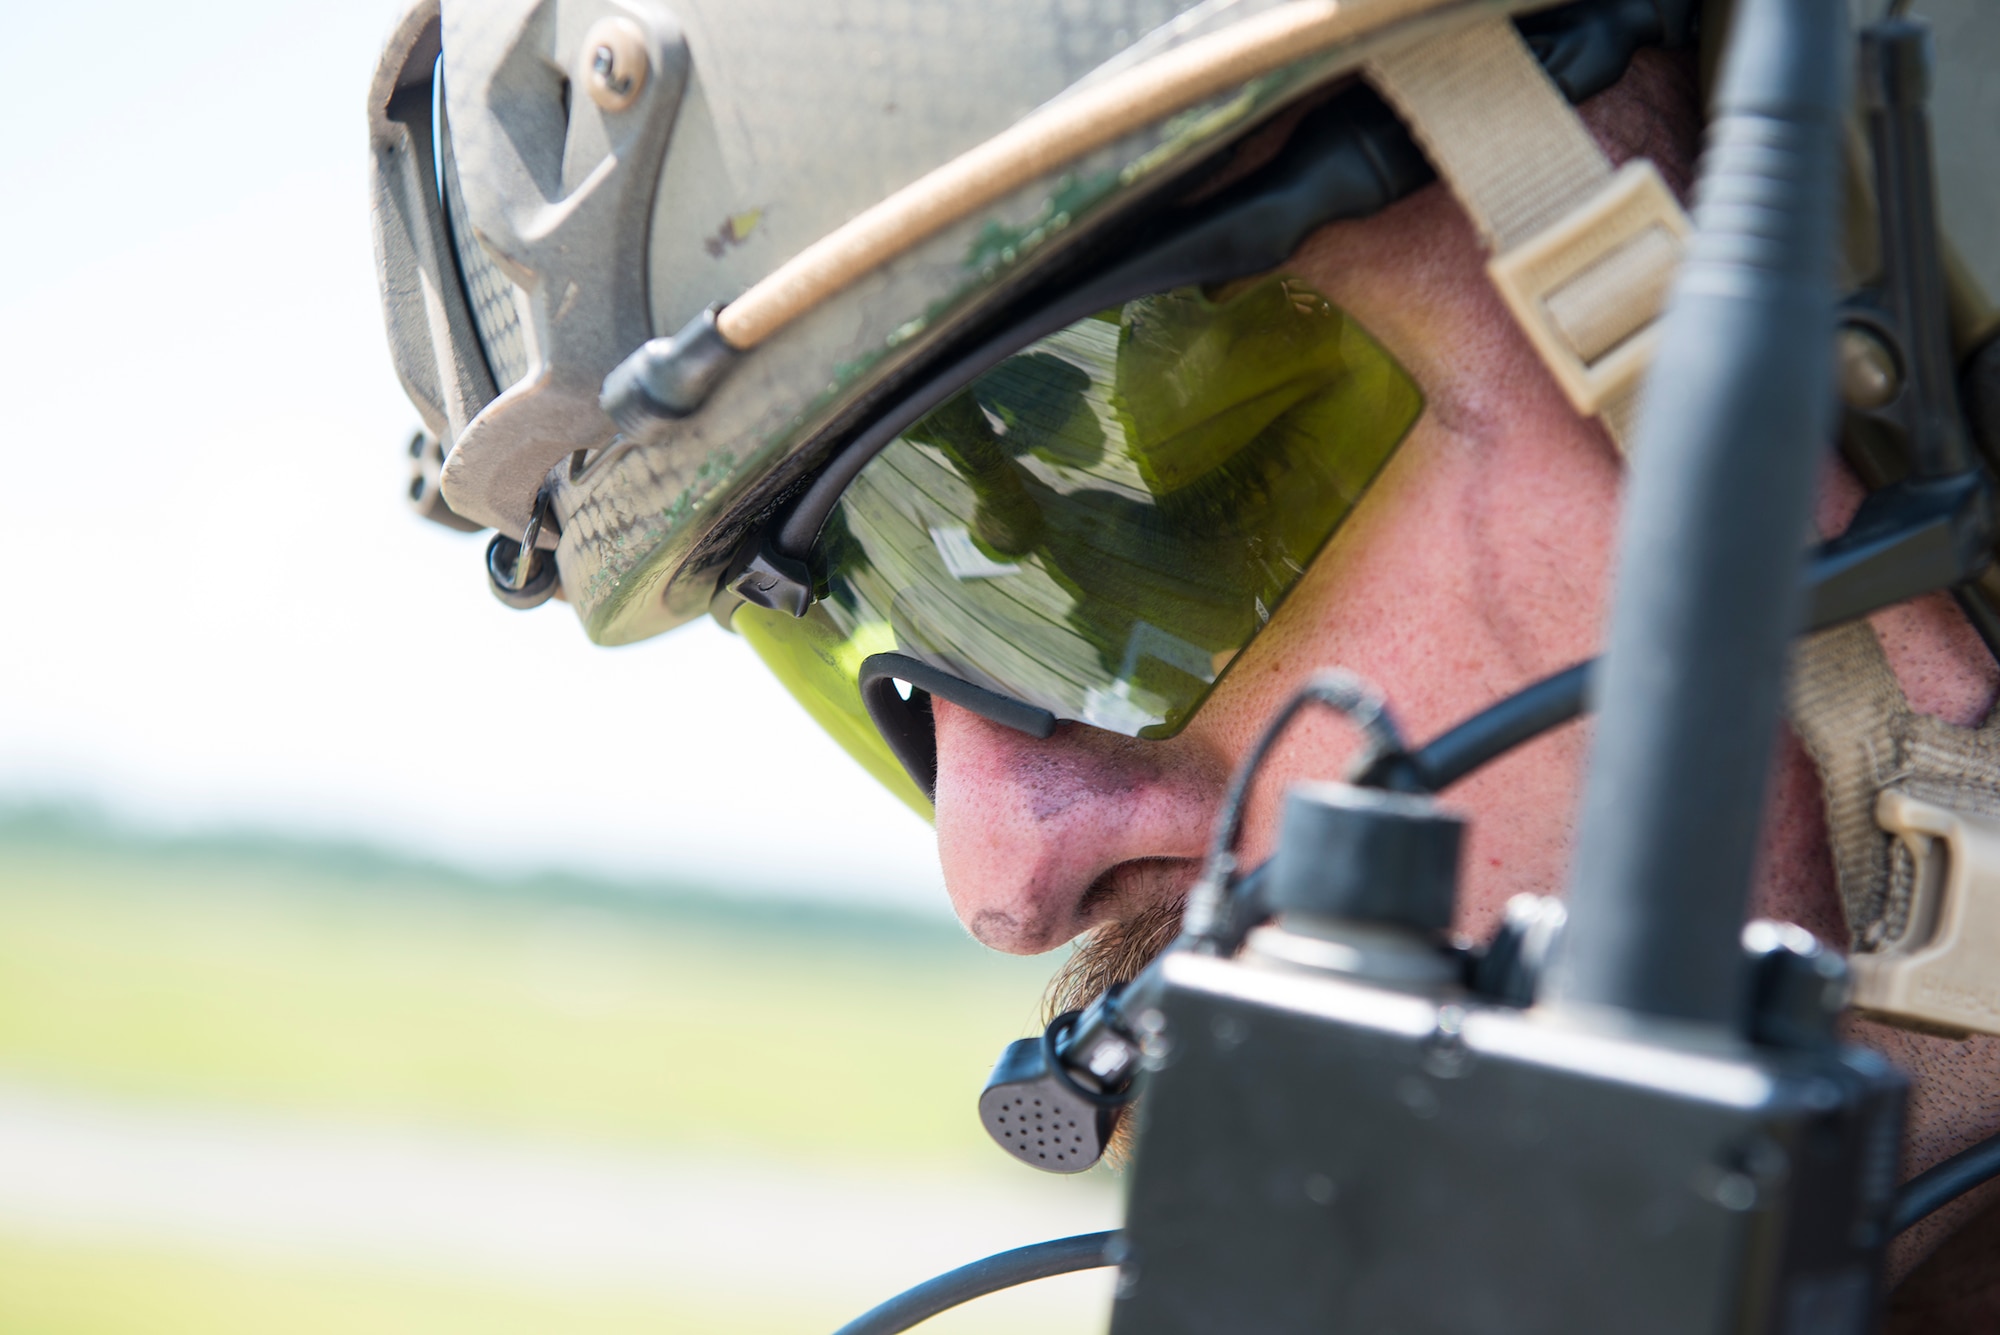 U.S. Air Force Staff Sgt. Tyler Puterbaugh, 7th Air Support Operations Squadron tactical air control party, calls in an A-10C Thunderbolt II strafe run during a joint training with the 74th Fighter Squadron June 18, 2015, on Grand Bay Bombing and Gunnery Range at Moody Air Force Base, Ga. The 74th FS and the 7th ASOS conducted a two-week joint training to maximize their training and improve their efficiency. (U.S. Air Force photo by Airman 1st Class Ceaira Tinsley/Released)